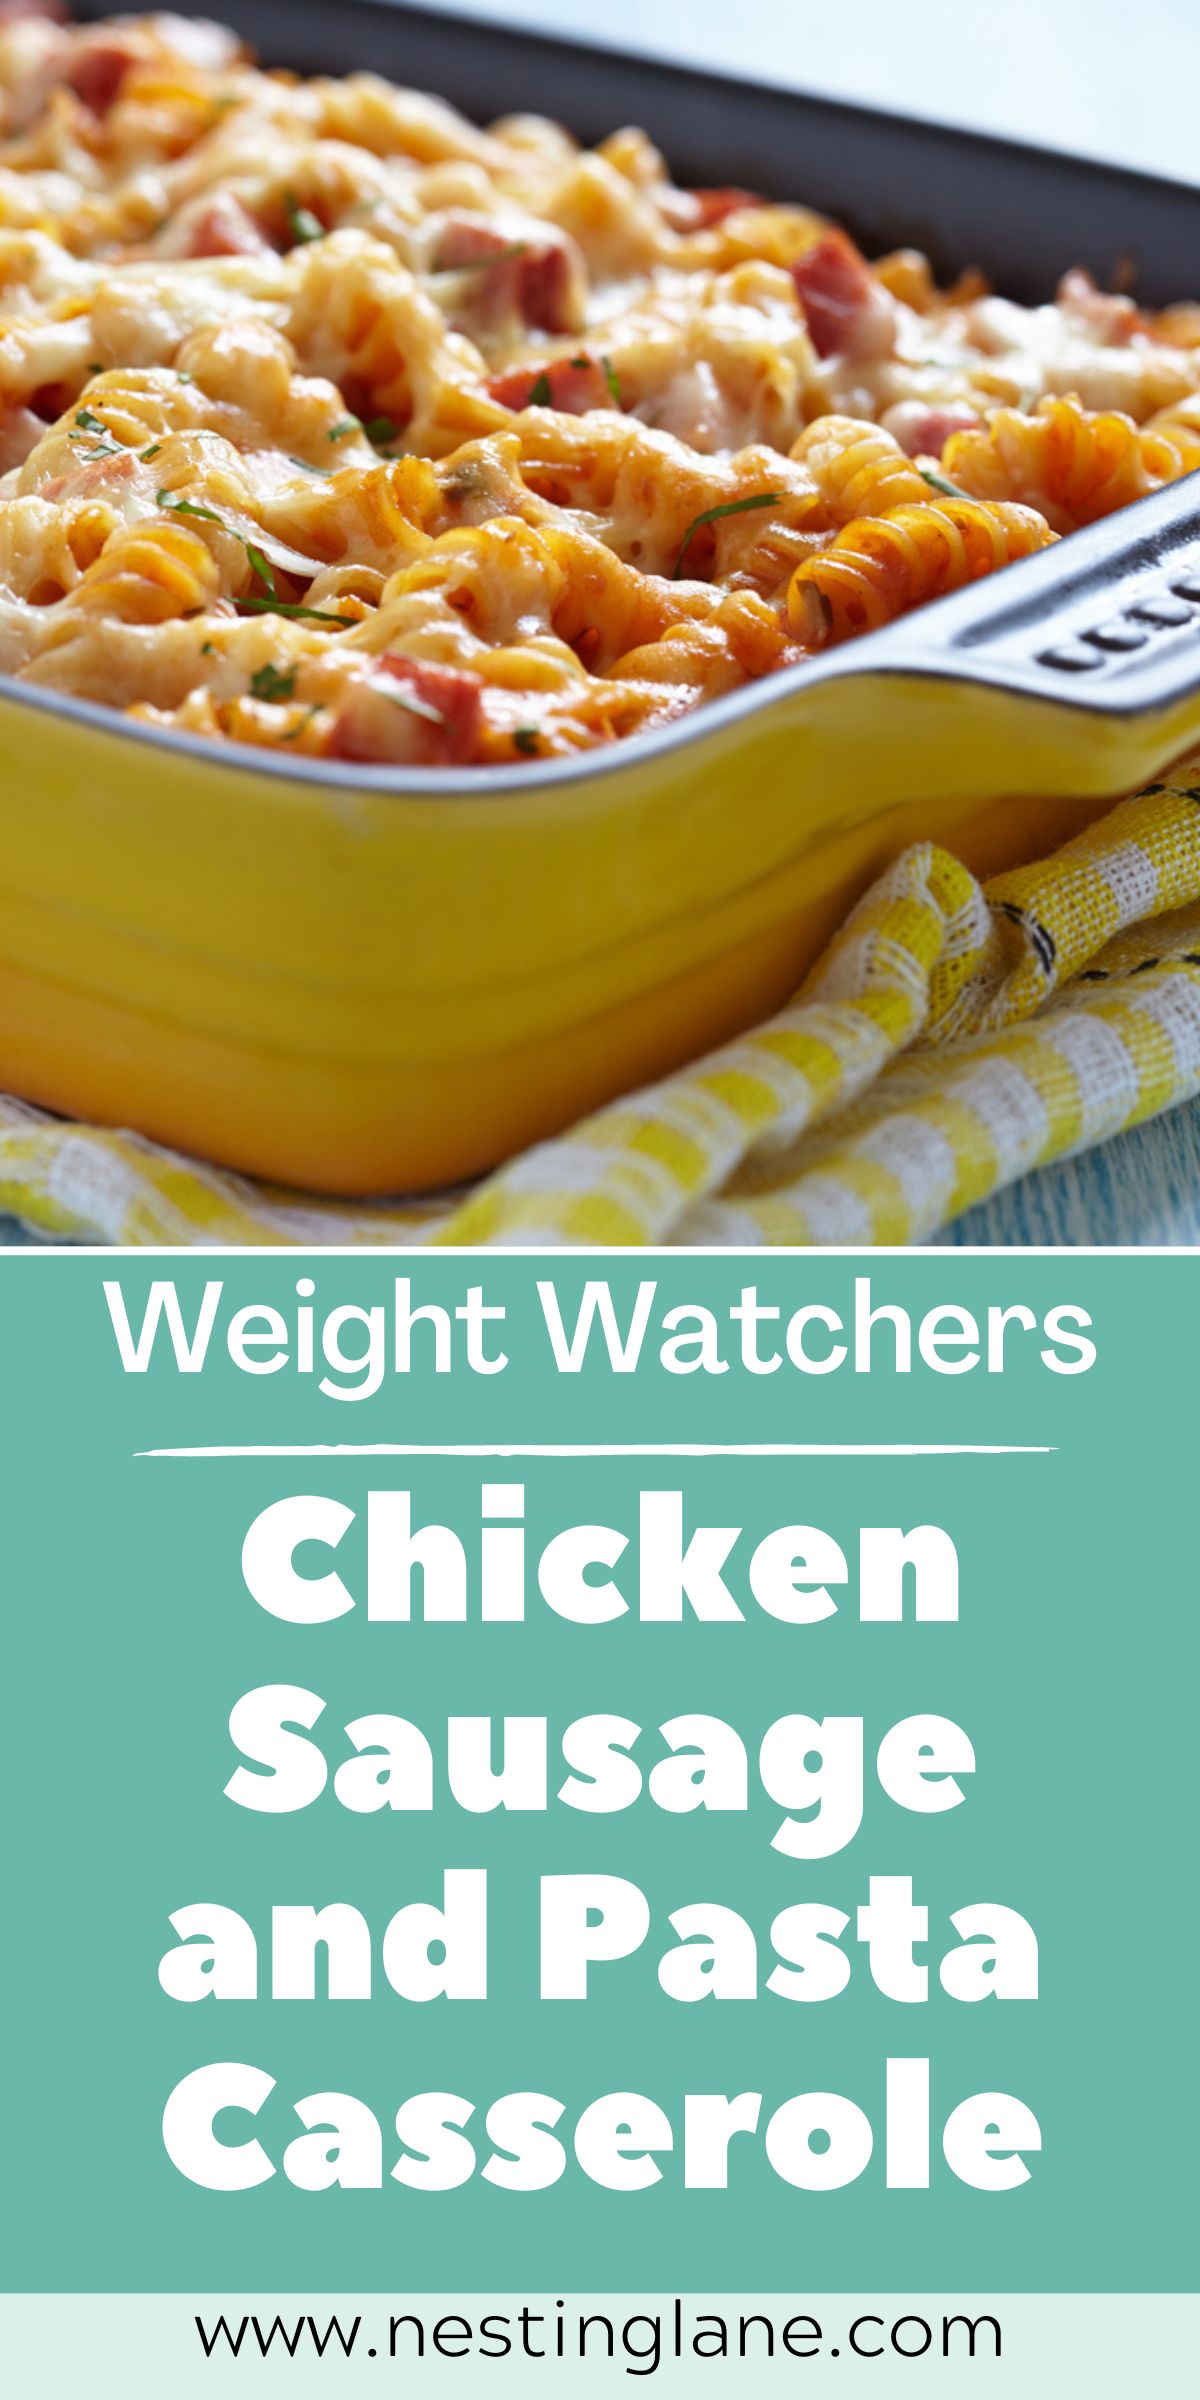 Graphic for Pinterest of Weight Watchers Chicken Sausage and Pasta Casserole Recipe.